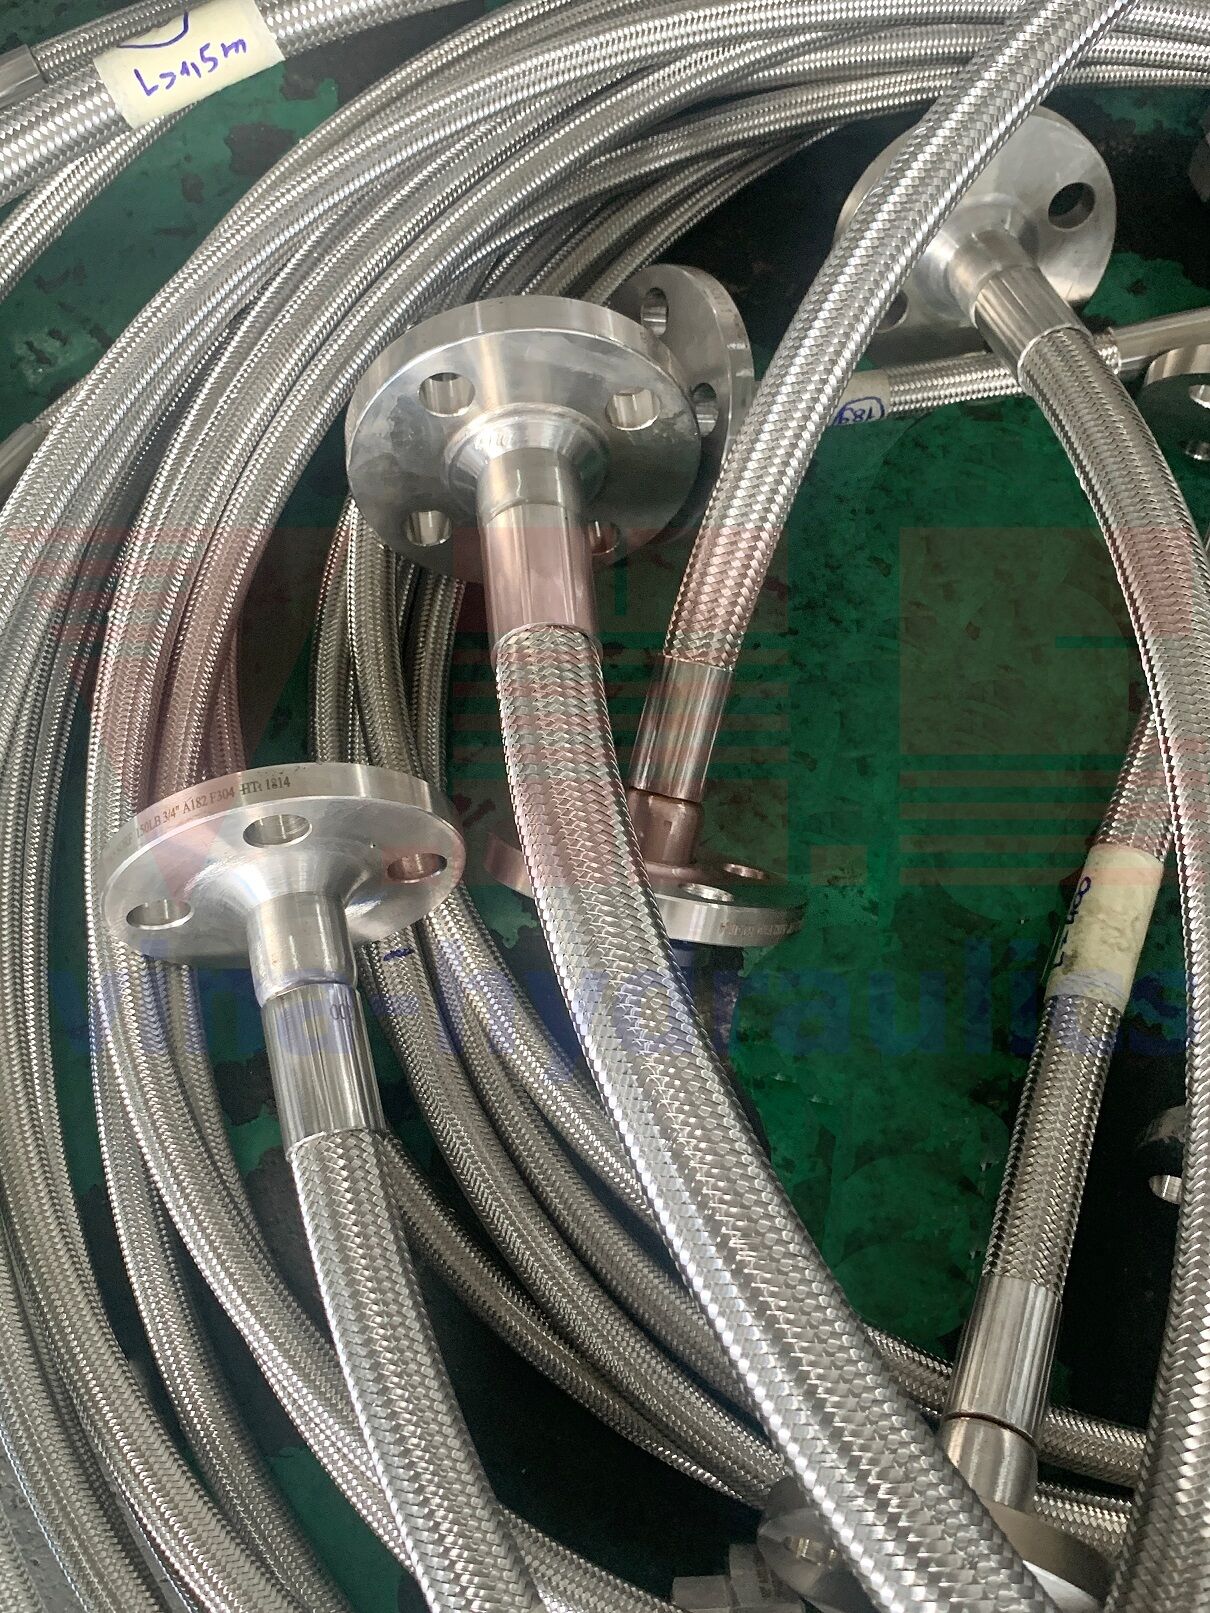 Processing Teflon PTFE 3/4'', 1/2'', 1'' hydraulic hose with stainless steel casings in different lengths with ANSI flanges